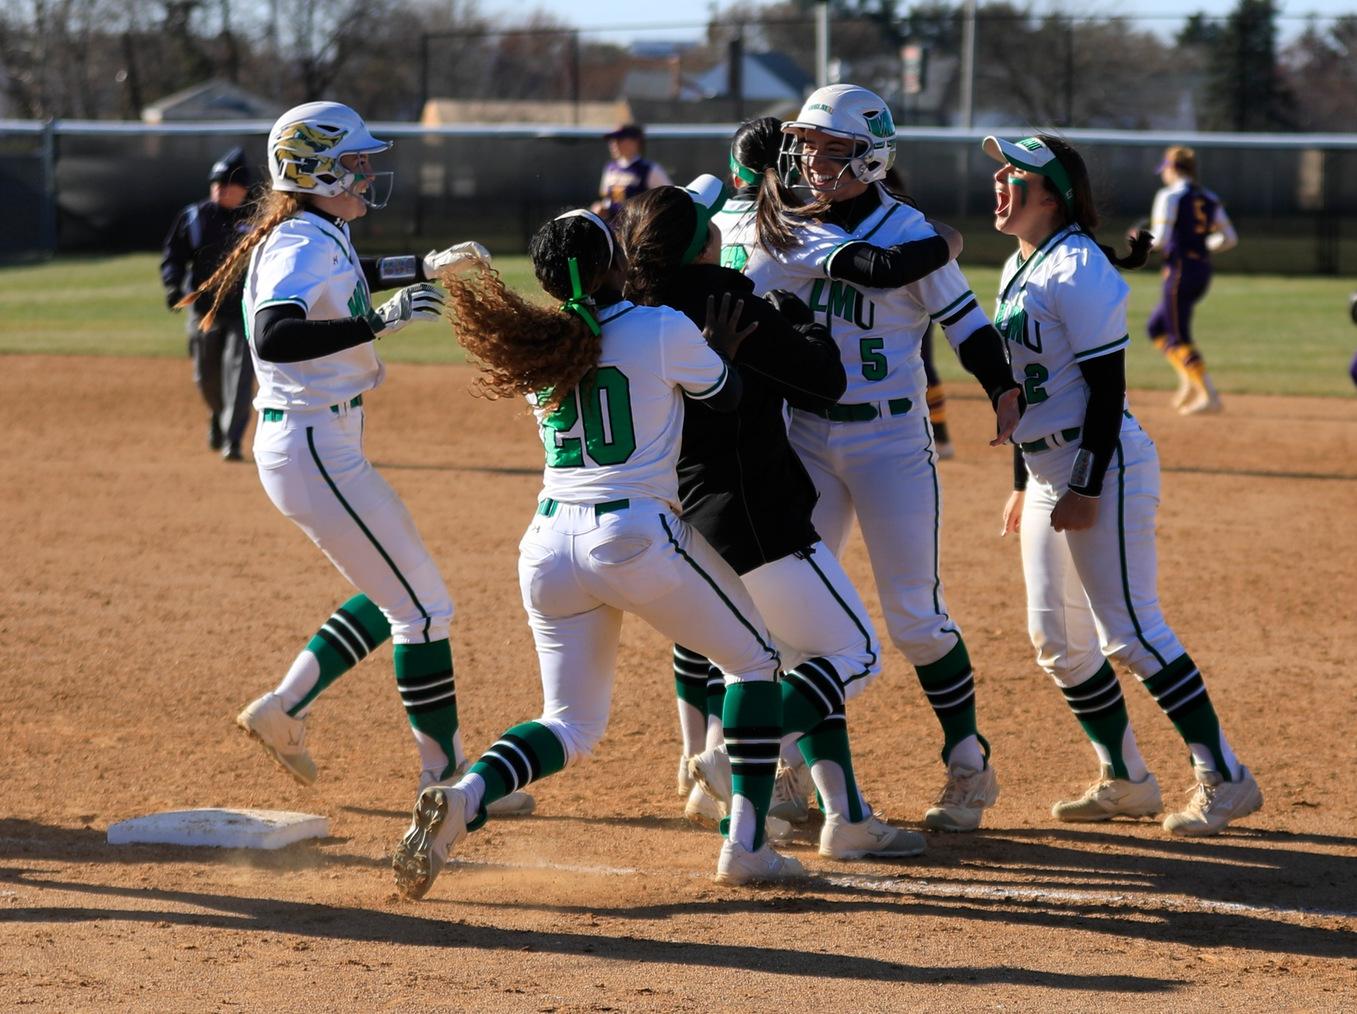 Copyright 2019; Wilmington University. All rights reserved. Photo of the celebration after Angela Antonini's walk-off against West Chester. Photo by Chris Vitale. March 26, 2019 vs. West Chester.